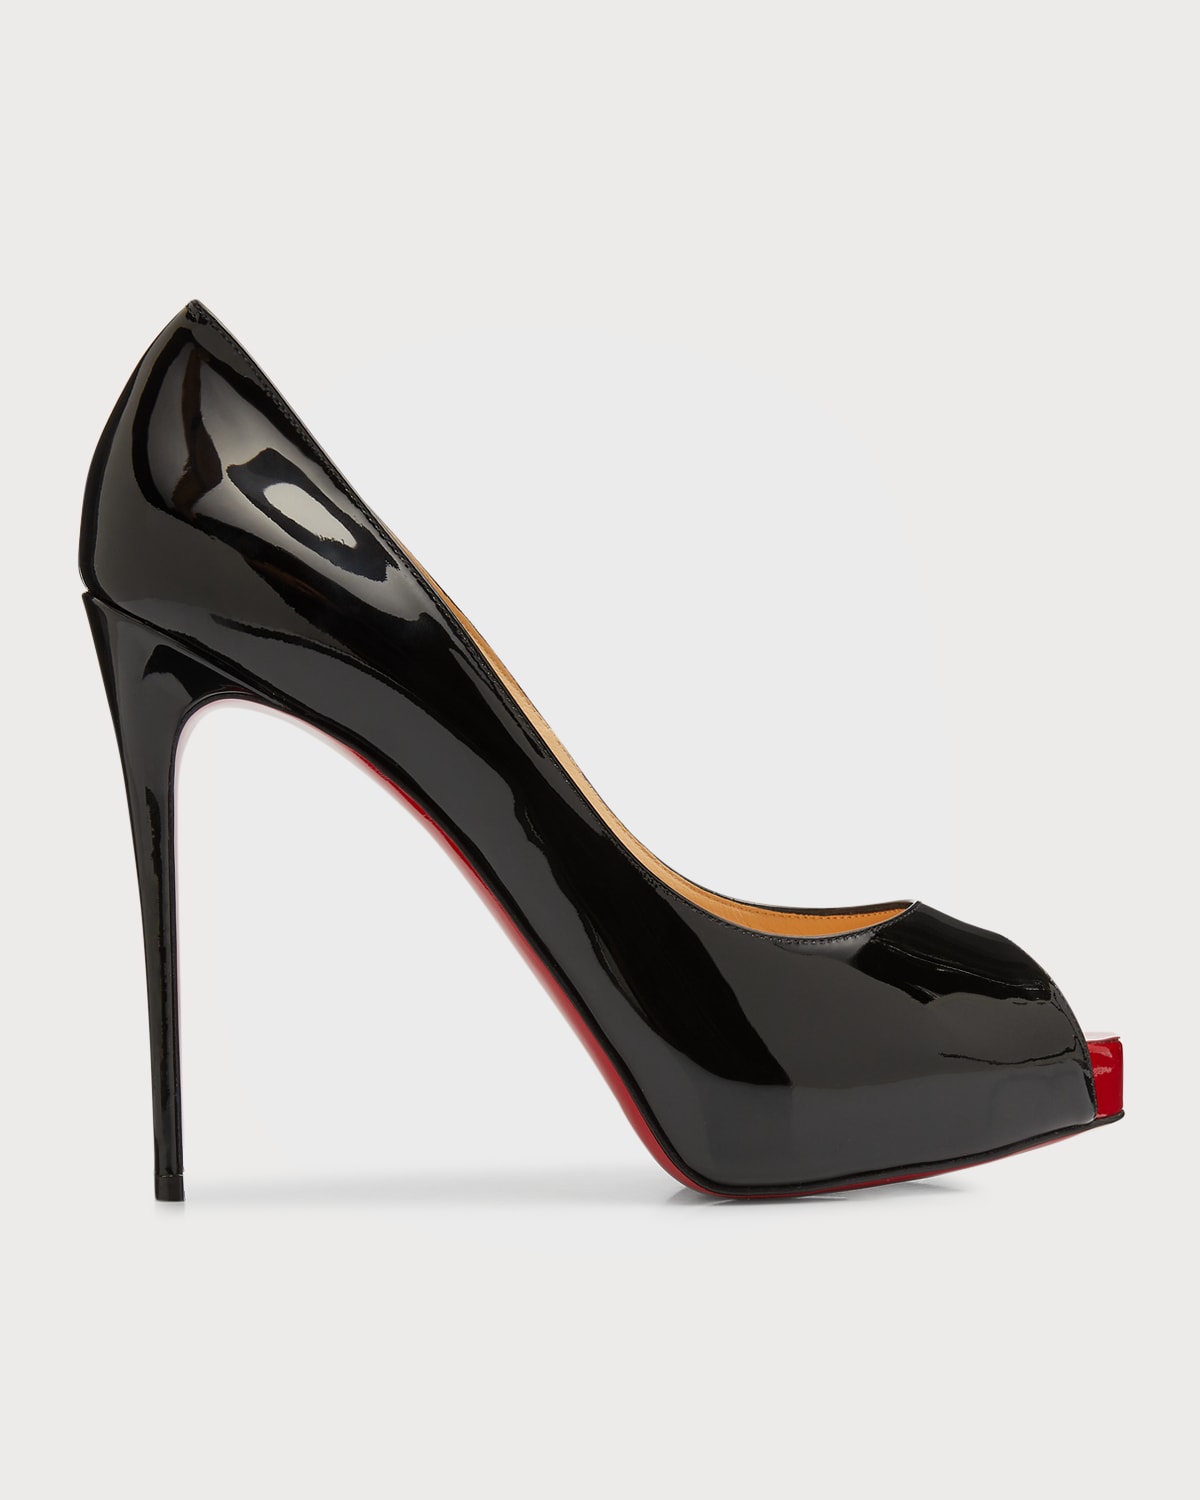 Louboutin New Very Prive Patent Red Sole Pumps Neiman